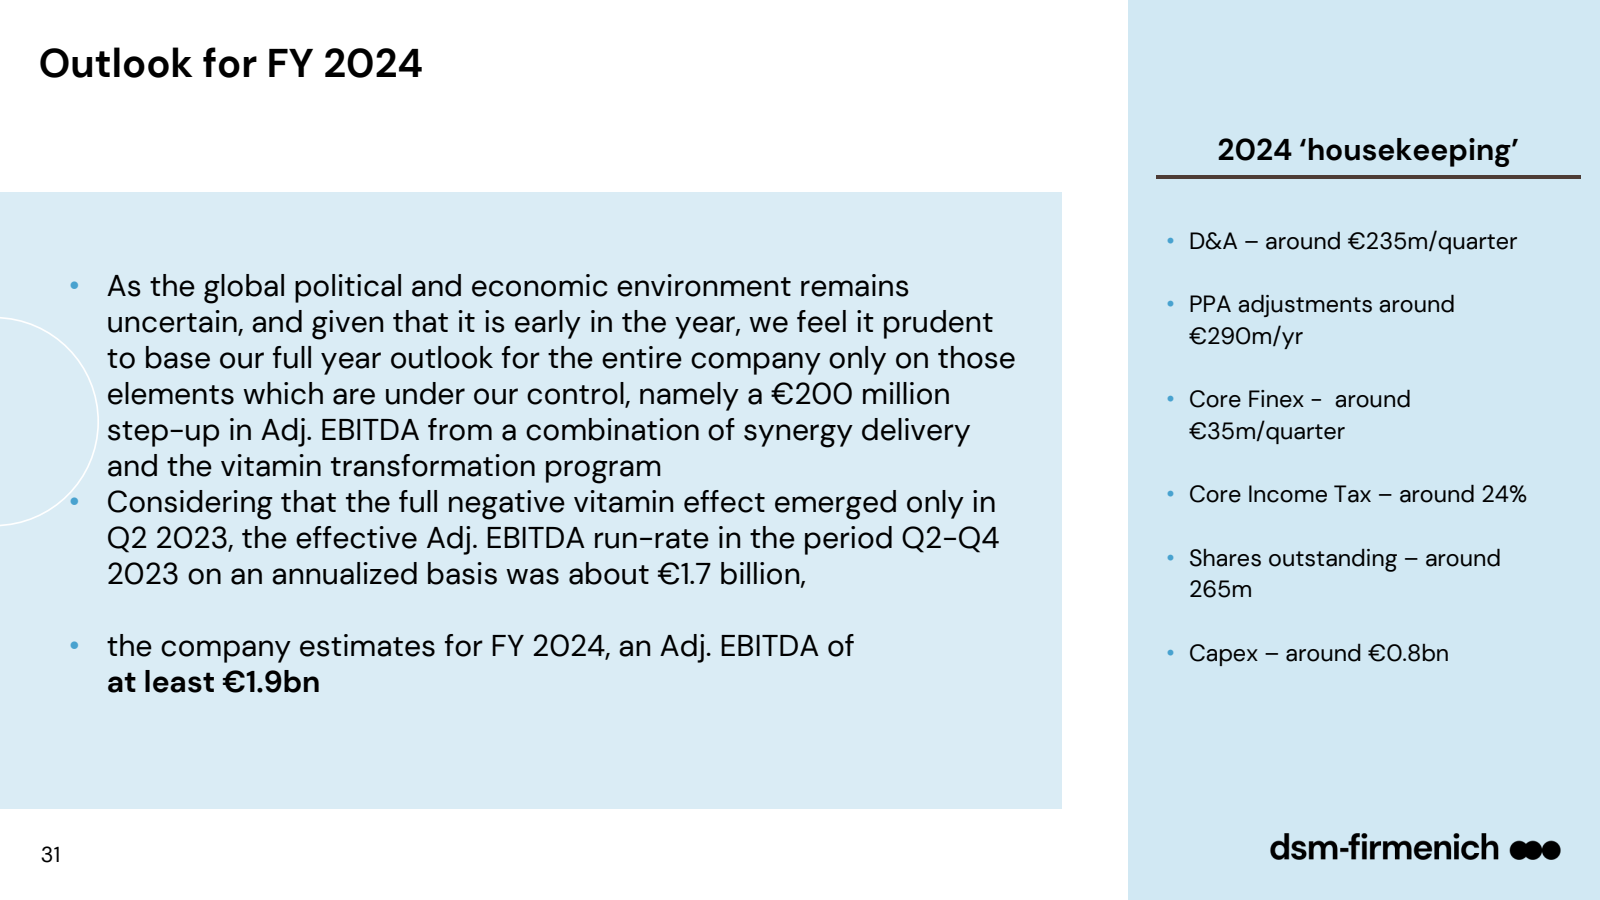 Outlook for FY 2024 